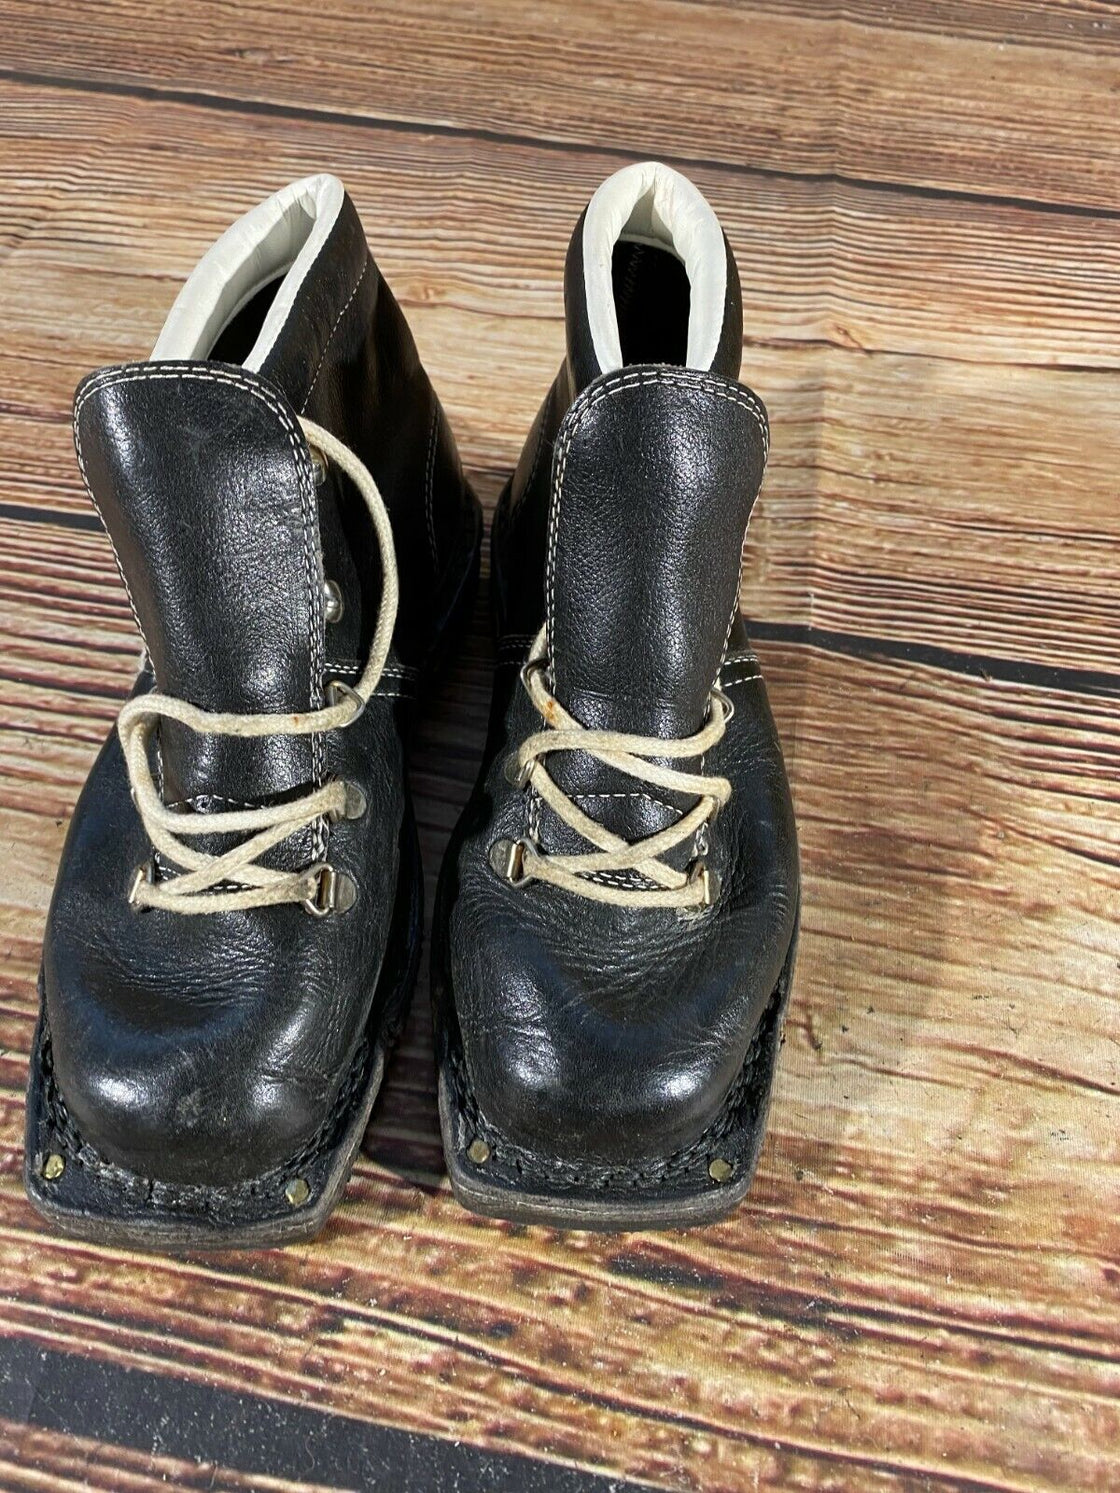 DALEX Vintage Cross Country Ski Boots for Kandahar Old Cable Kids EU34 US3